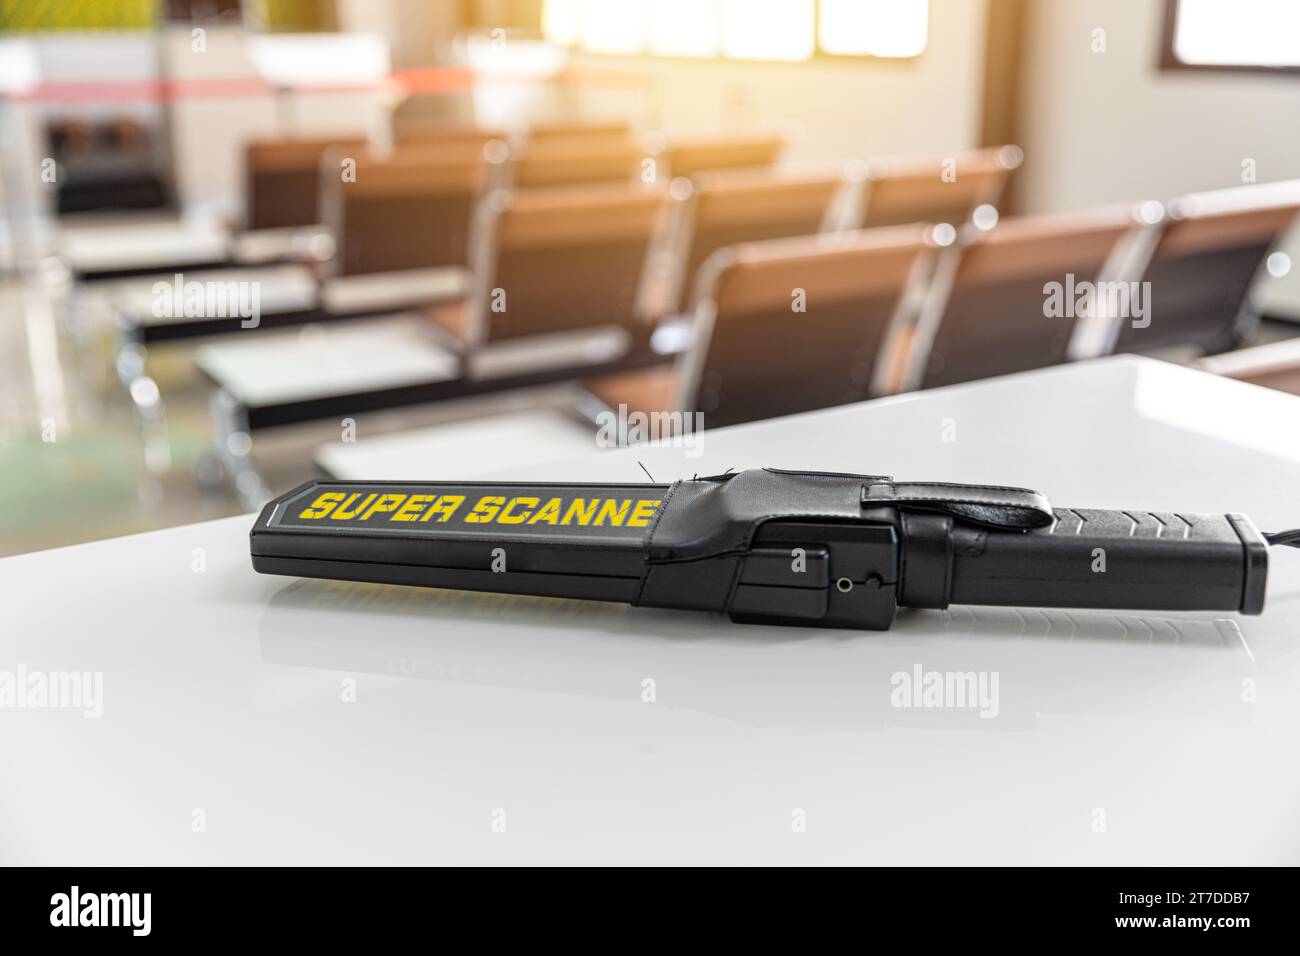 closeup metal detector weapon bomb scanner tool for security use in airport or safety public place Stock Photo